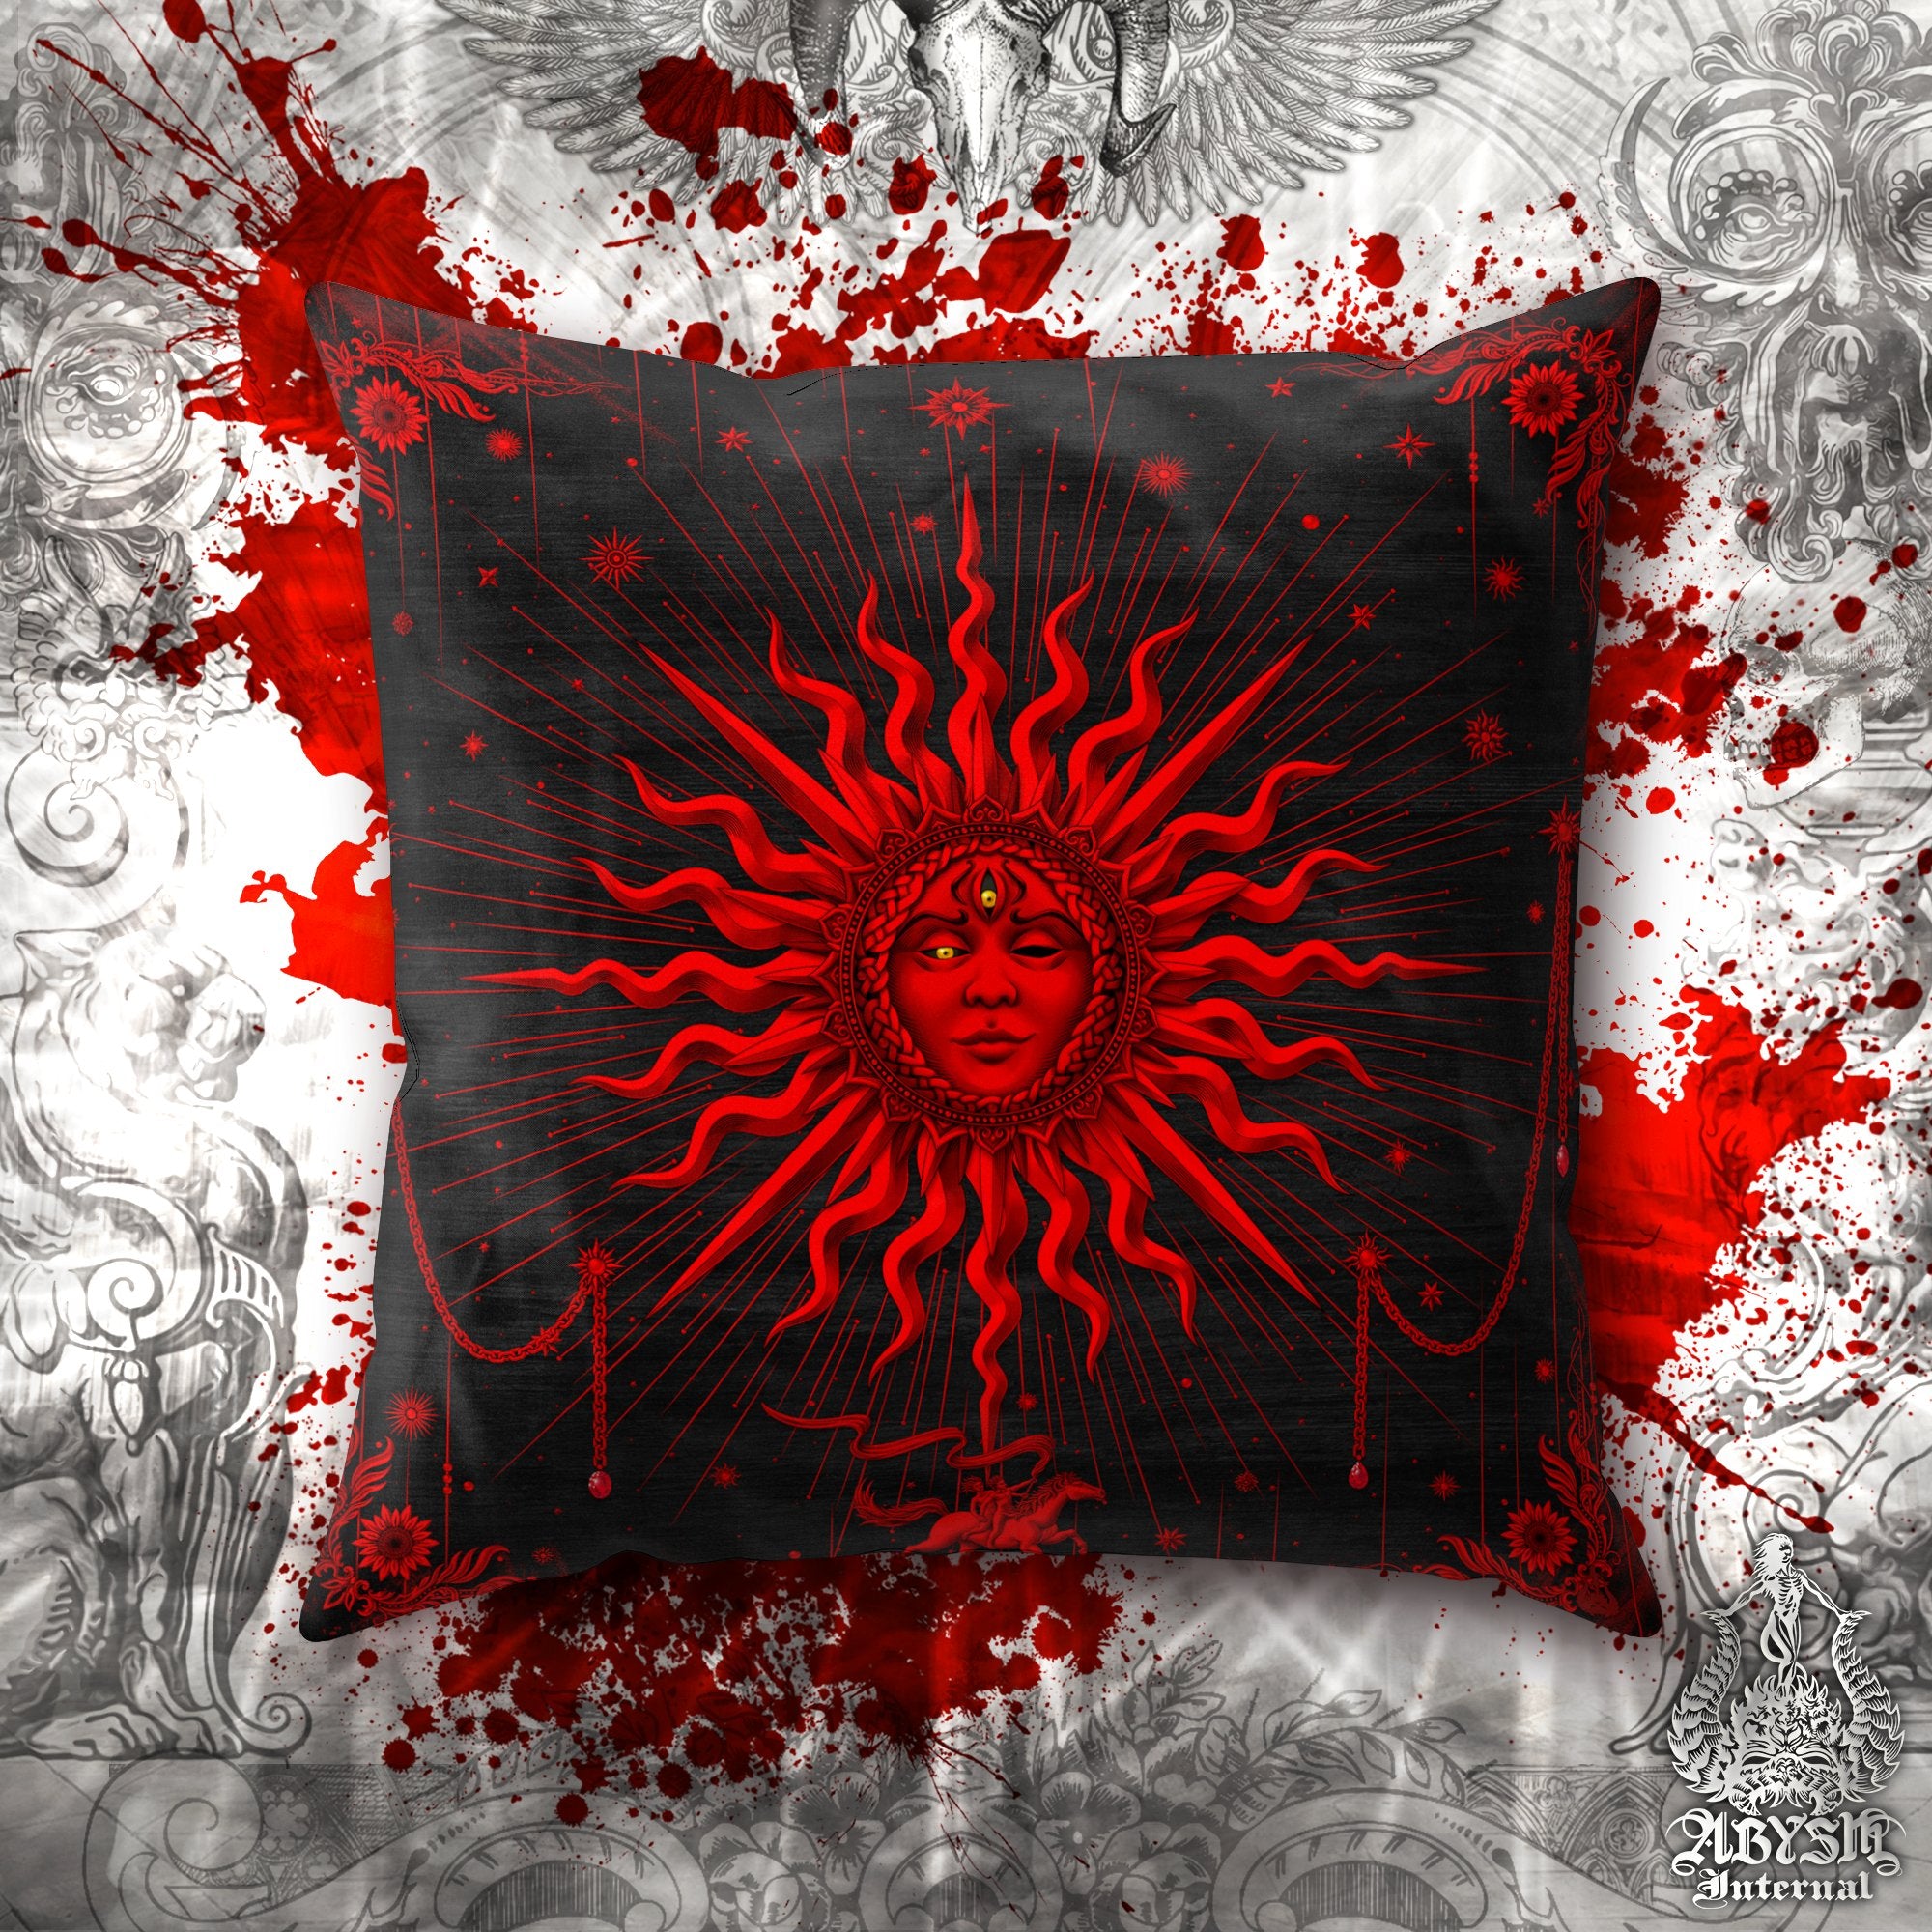 Gothic Sun Throw Pillow, Decorative Accent Pillow, Square Cushion Cover, Arcana Tarot Art, Alternative Home, Fortune & Magic Room Decor - Bloody Goth, Black Red - Abysm Internal